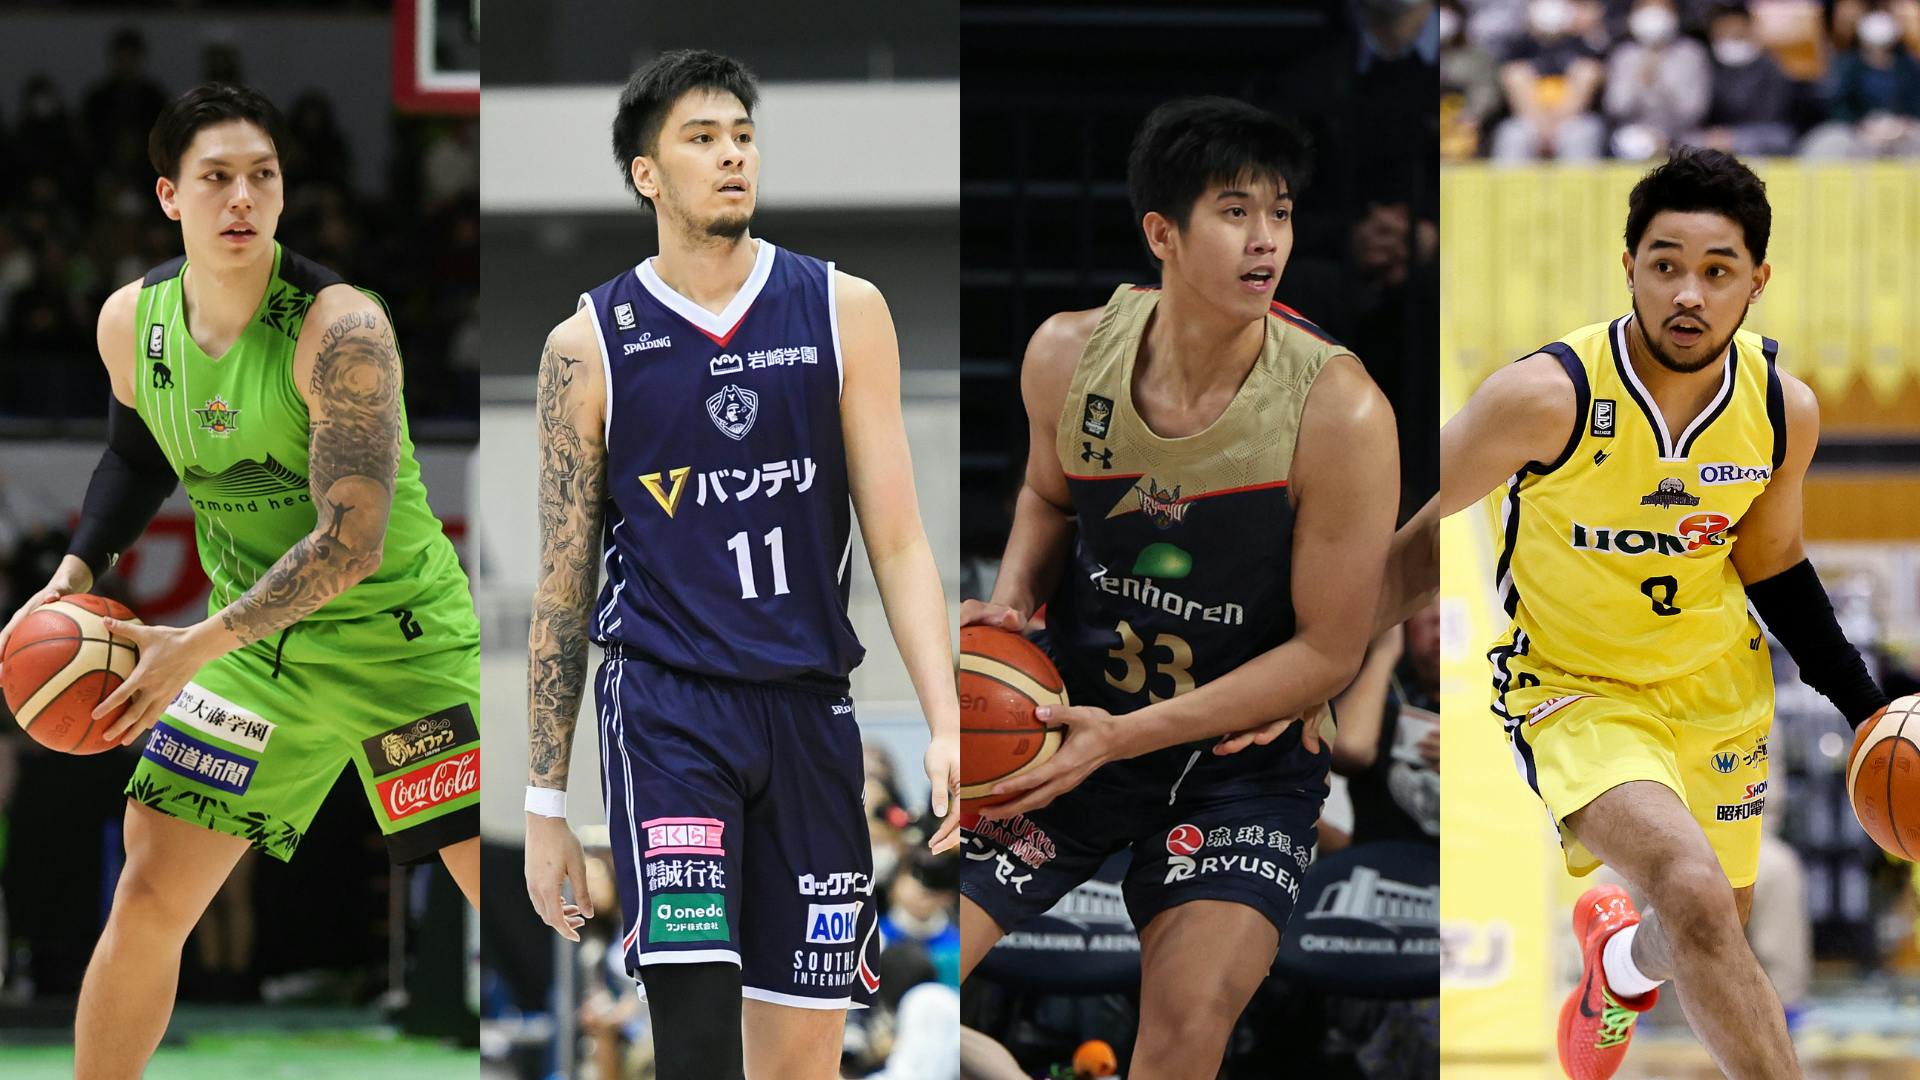 B.LEAGUE: Captain Dwight leads All-Star first-timers in Asia Rising Star Game